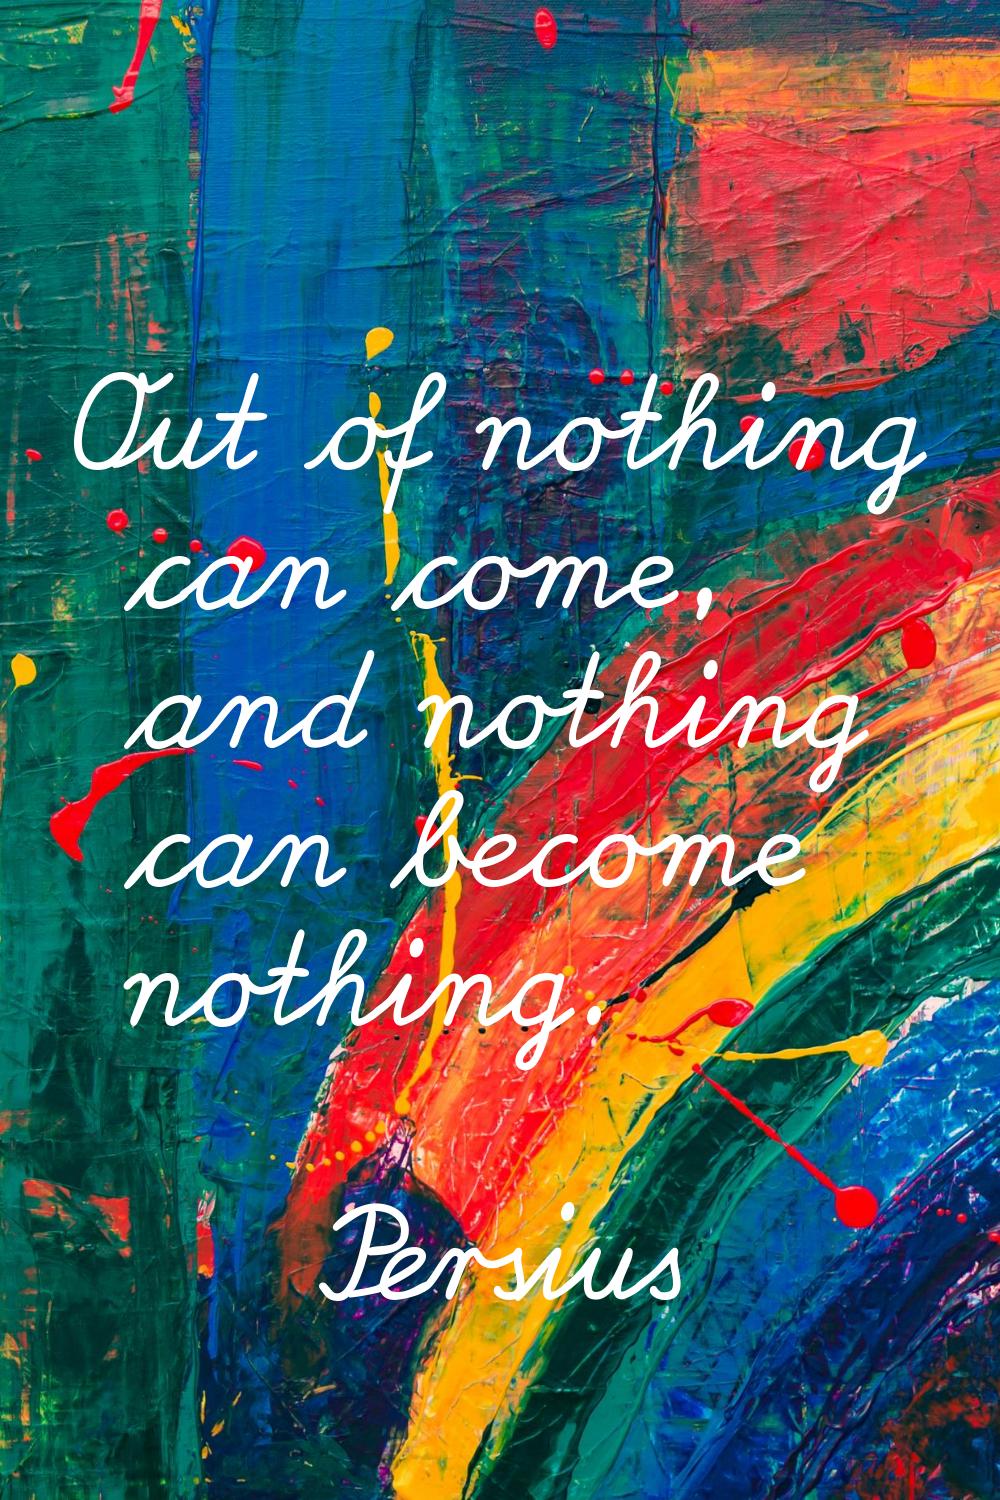 Out of nothing can come, and nothing can become nothing.